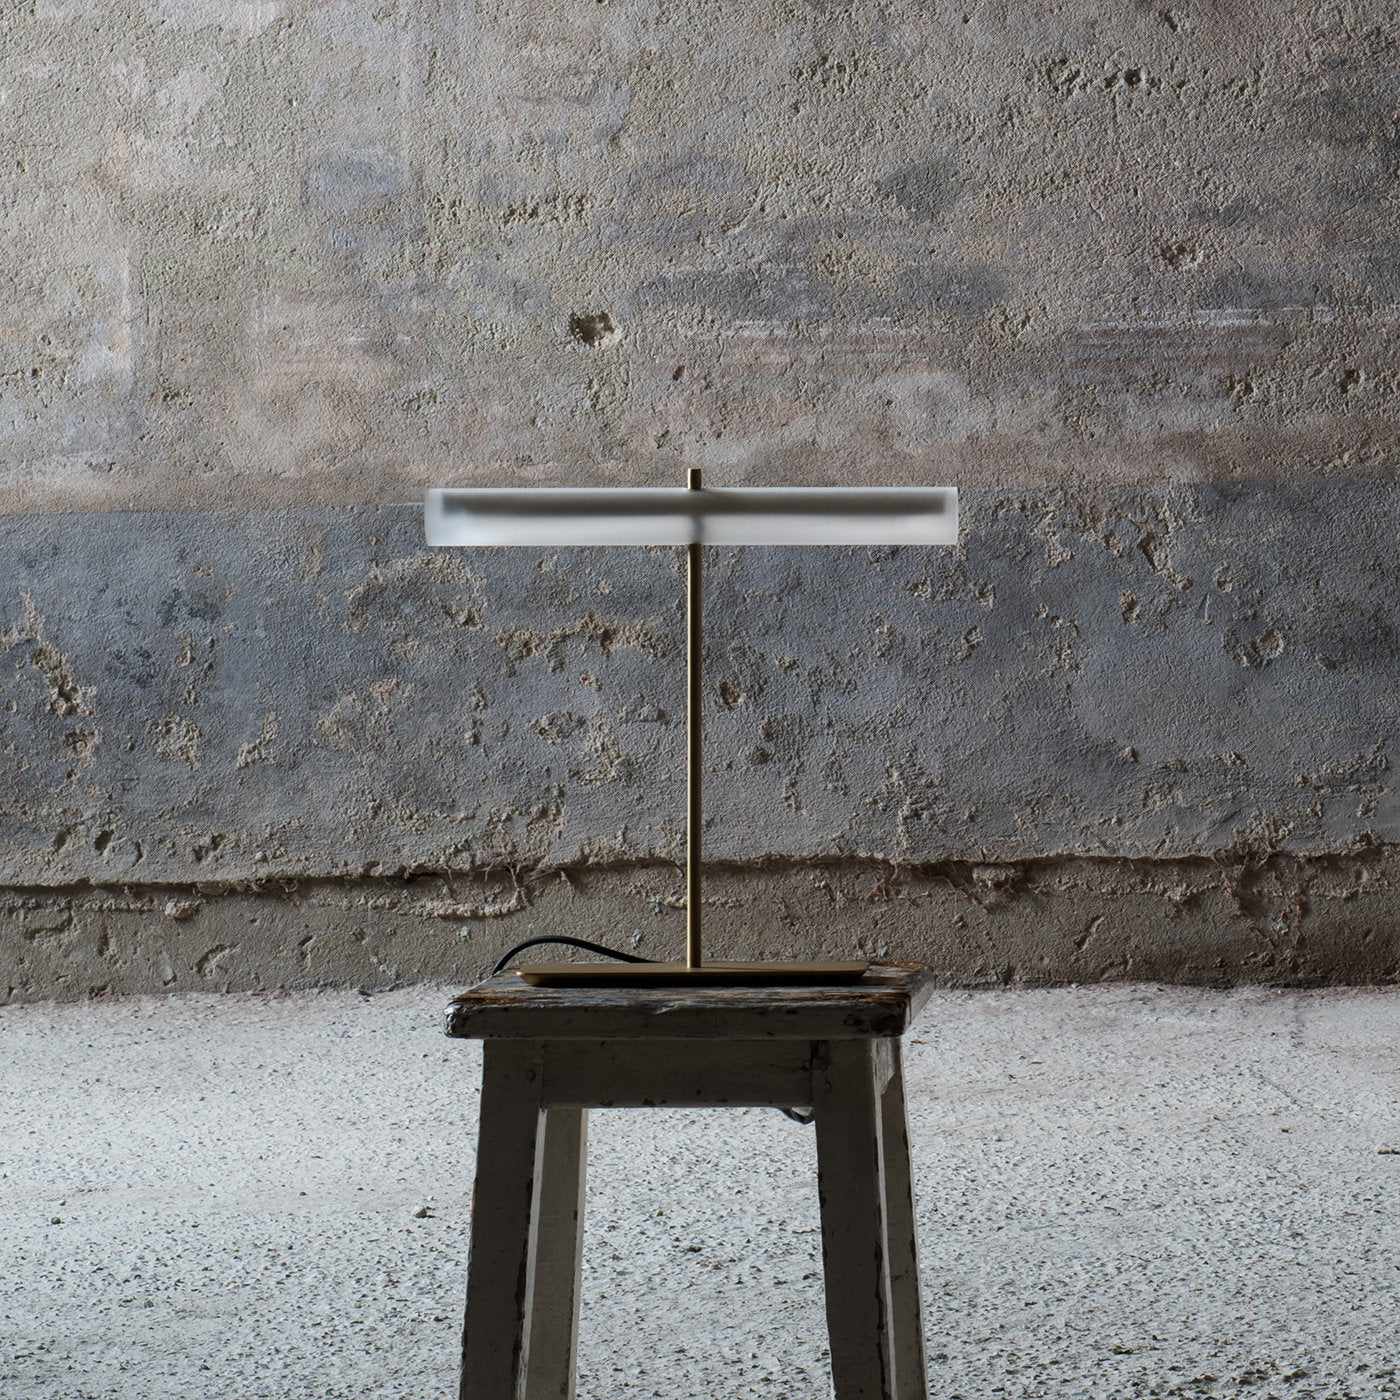 PPT01 table lamp - Alternative view 1